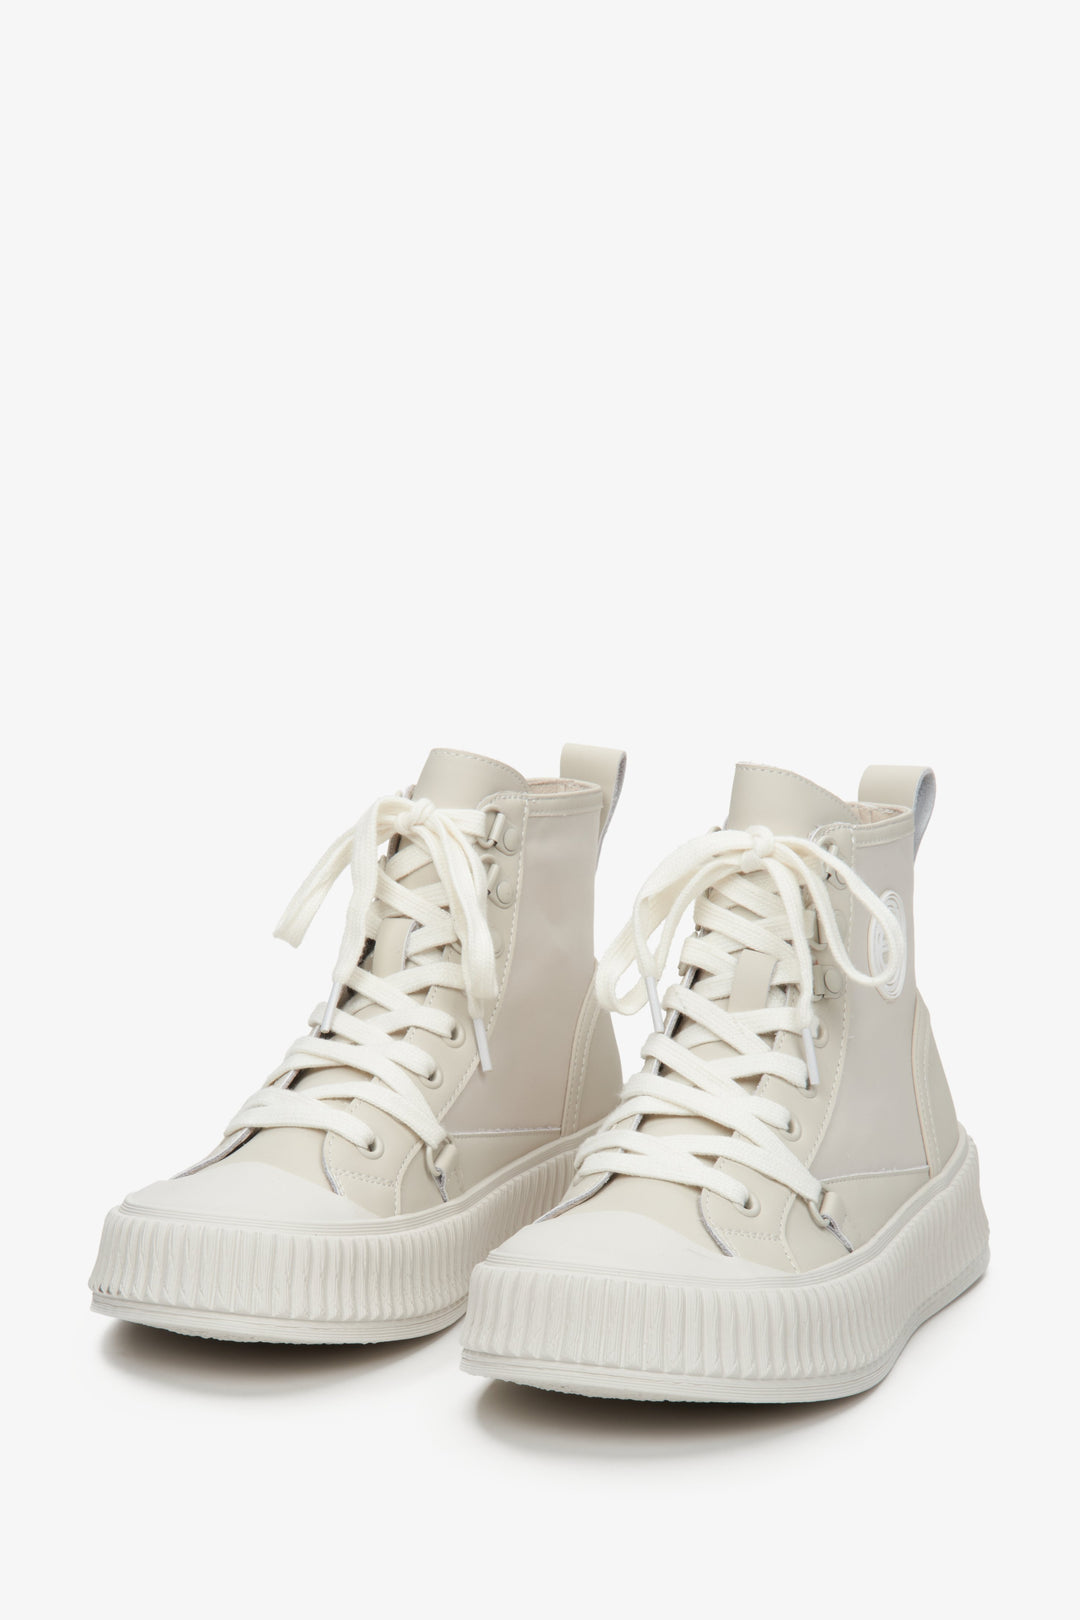 Women's white high-top sneakers made of genuine leather, suitable for spring/fall.